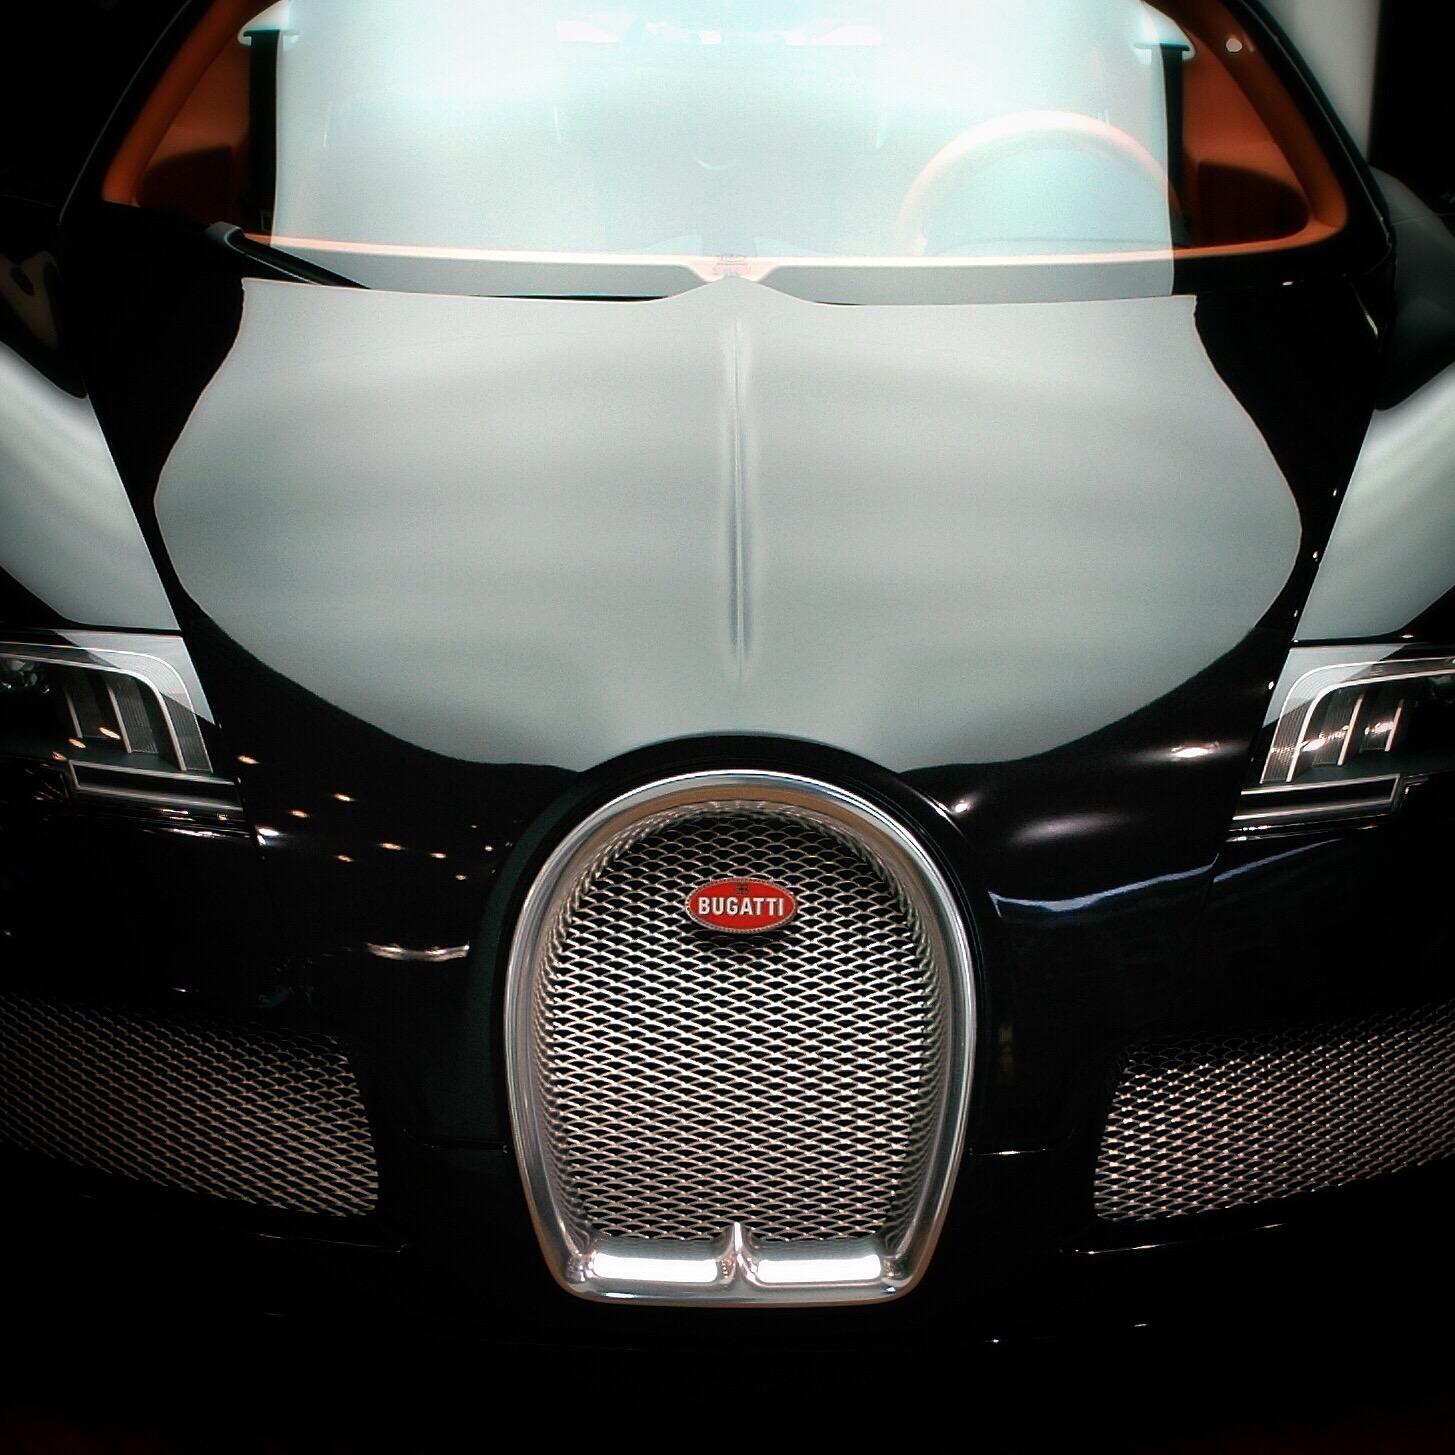 You just know someone has wished they were pulled over by a Bugatti Veyron over a Ford. Maybe that’s just us.